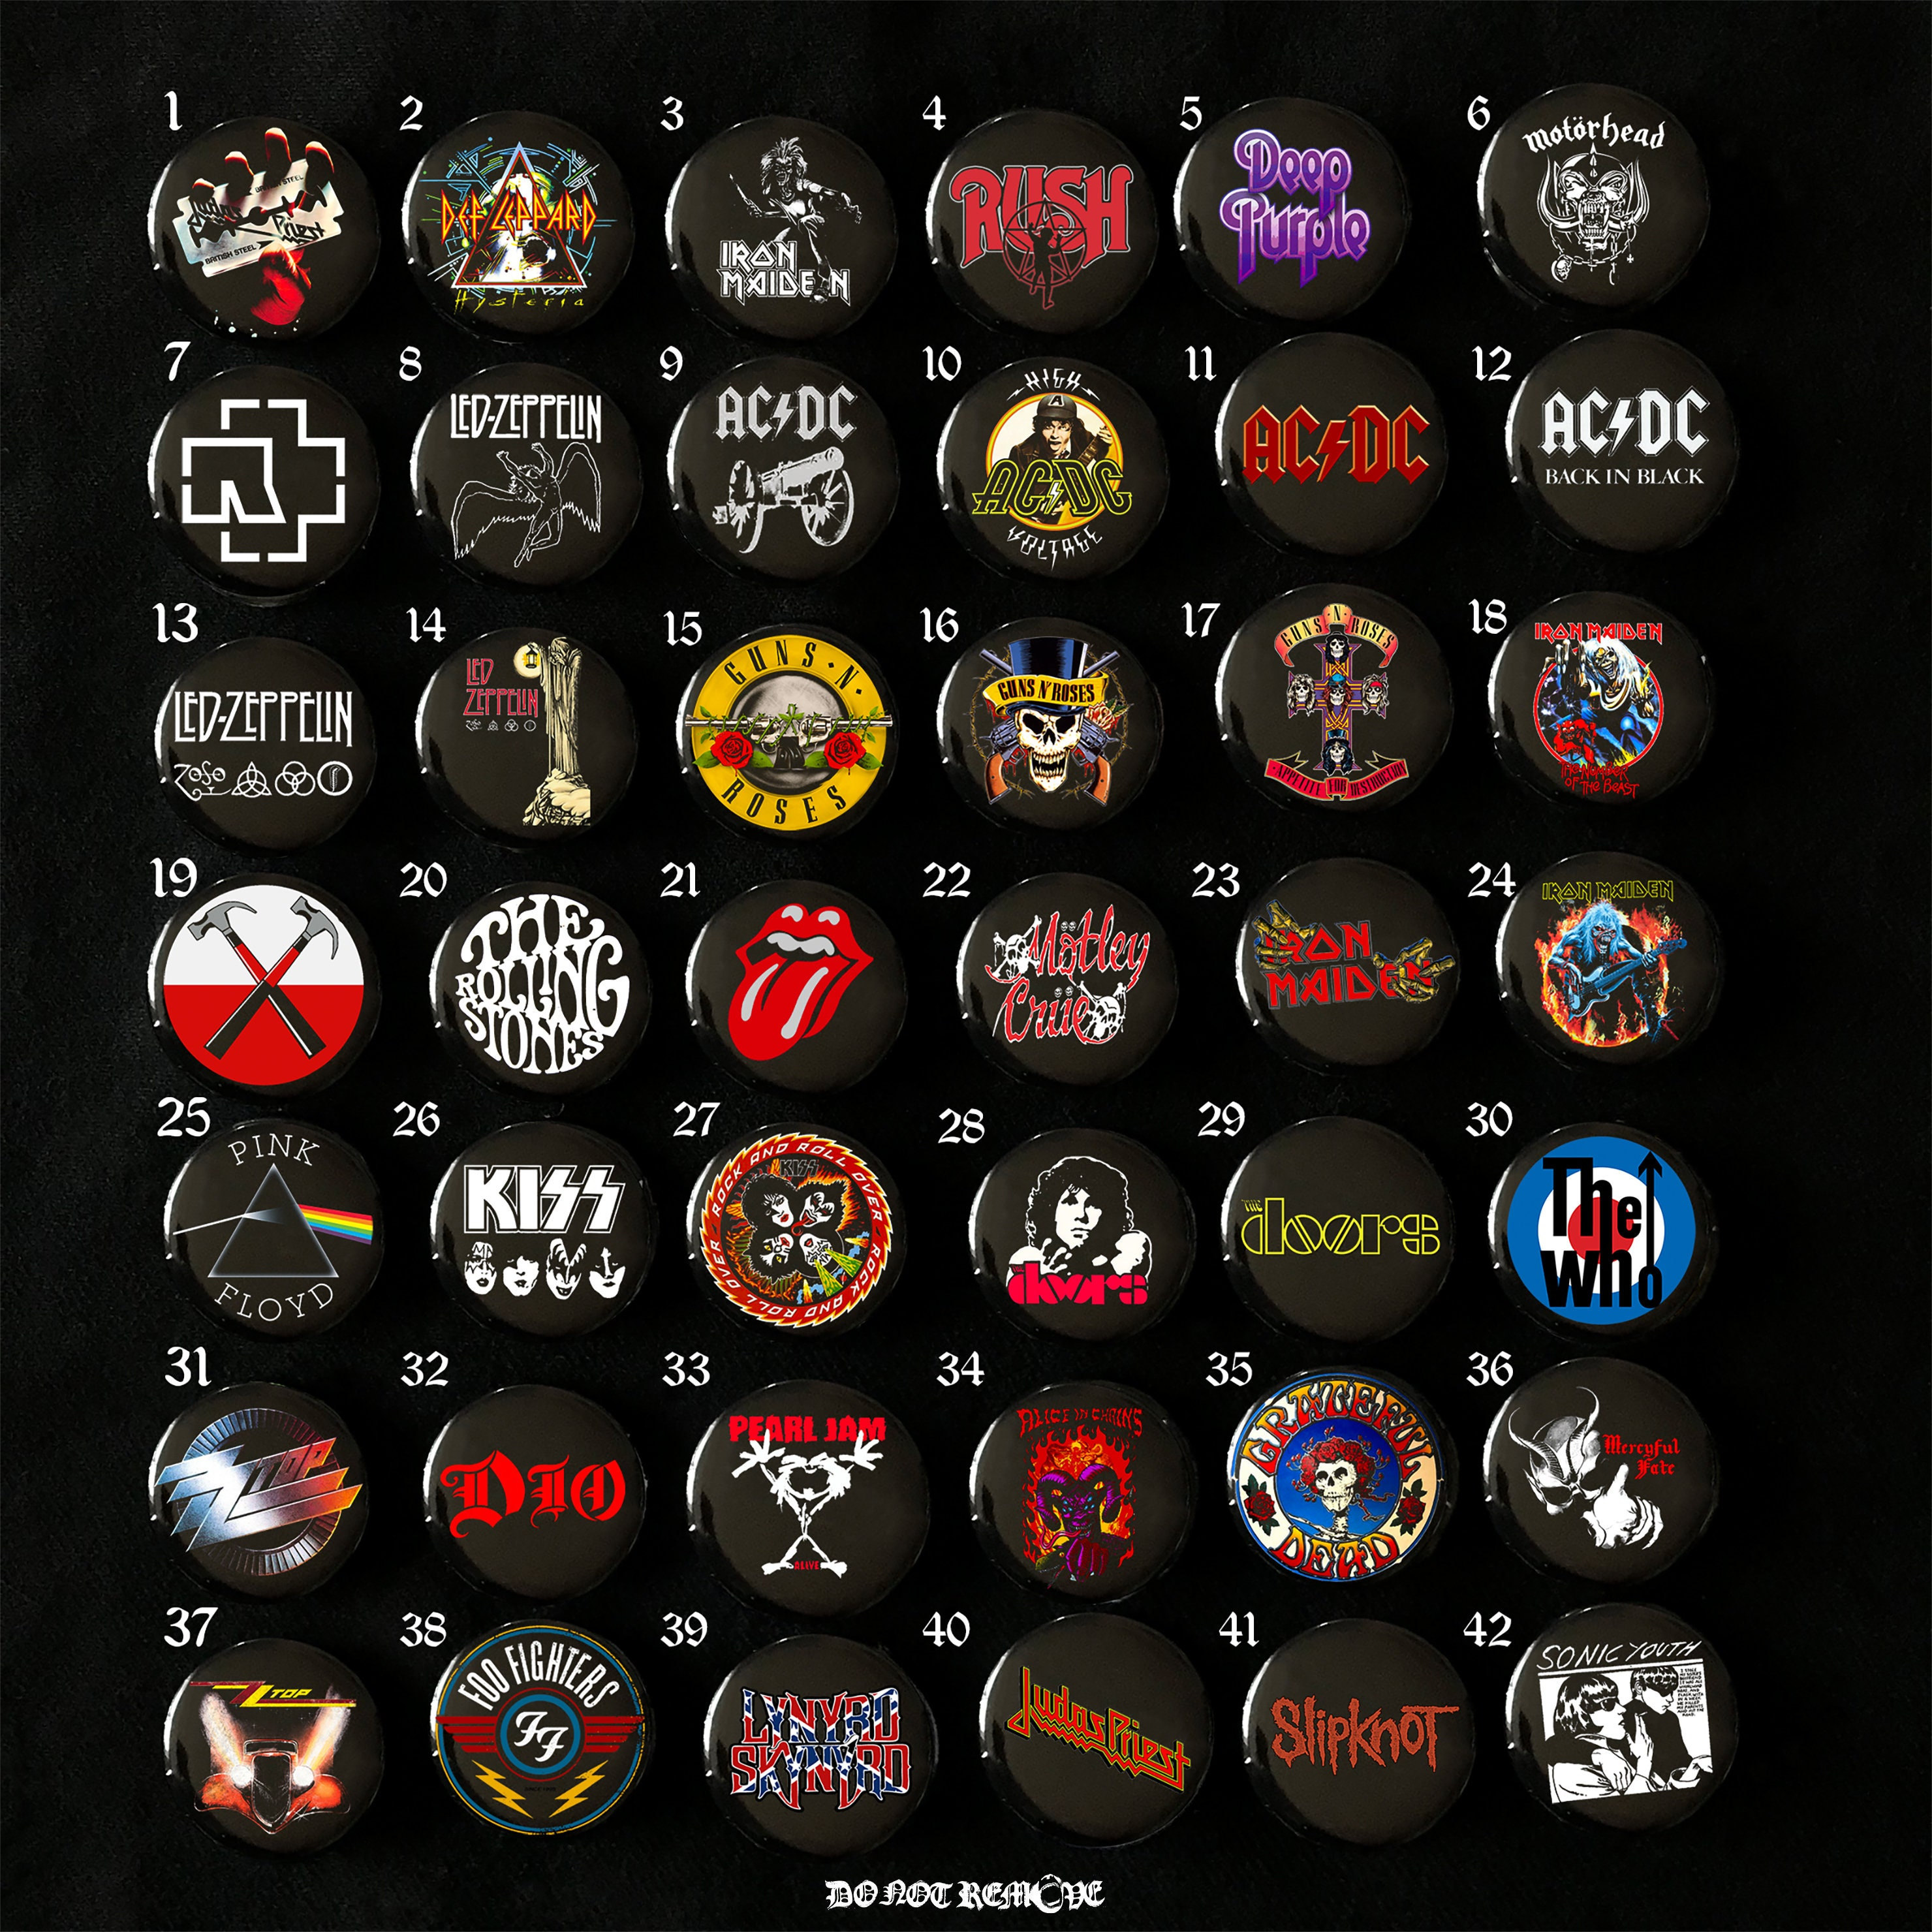 ThePinnedPh BAND Button Pin Collection